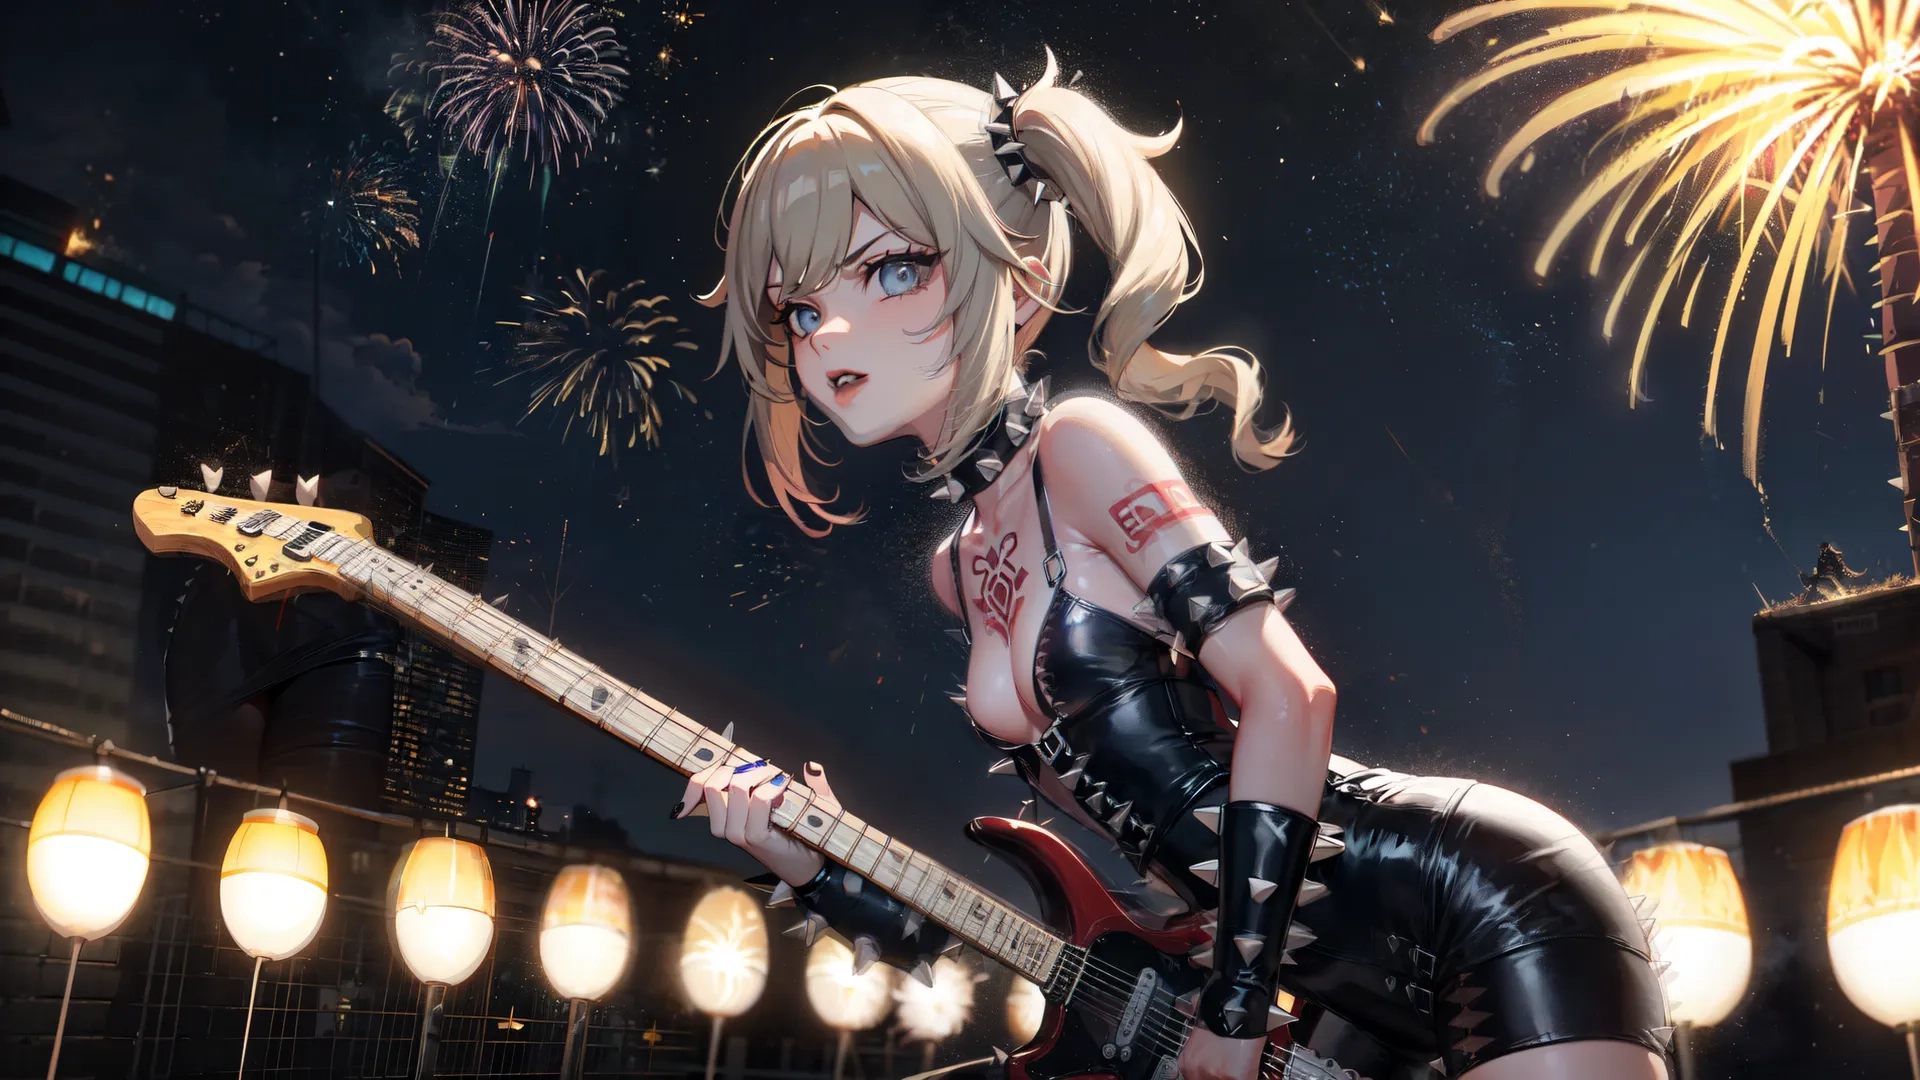 a picture of an anime girl holding a guitar outdoors on a city block at night with fireworks in the sky overhead it's dark
